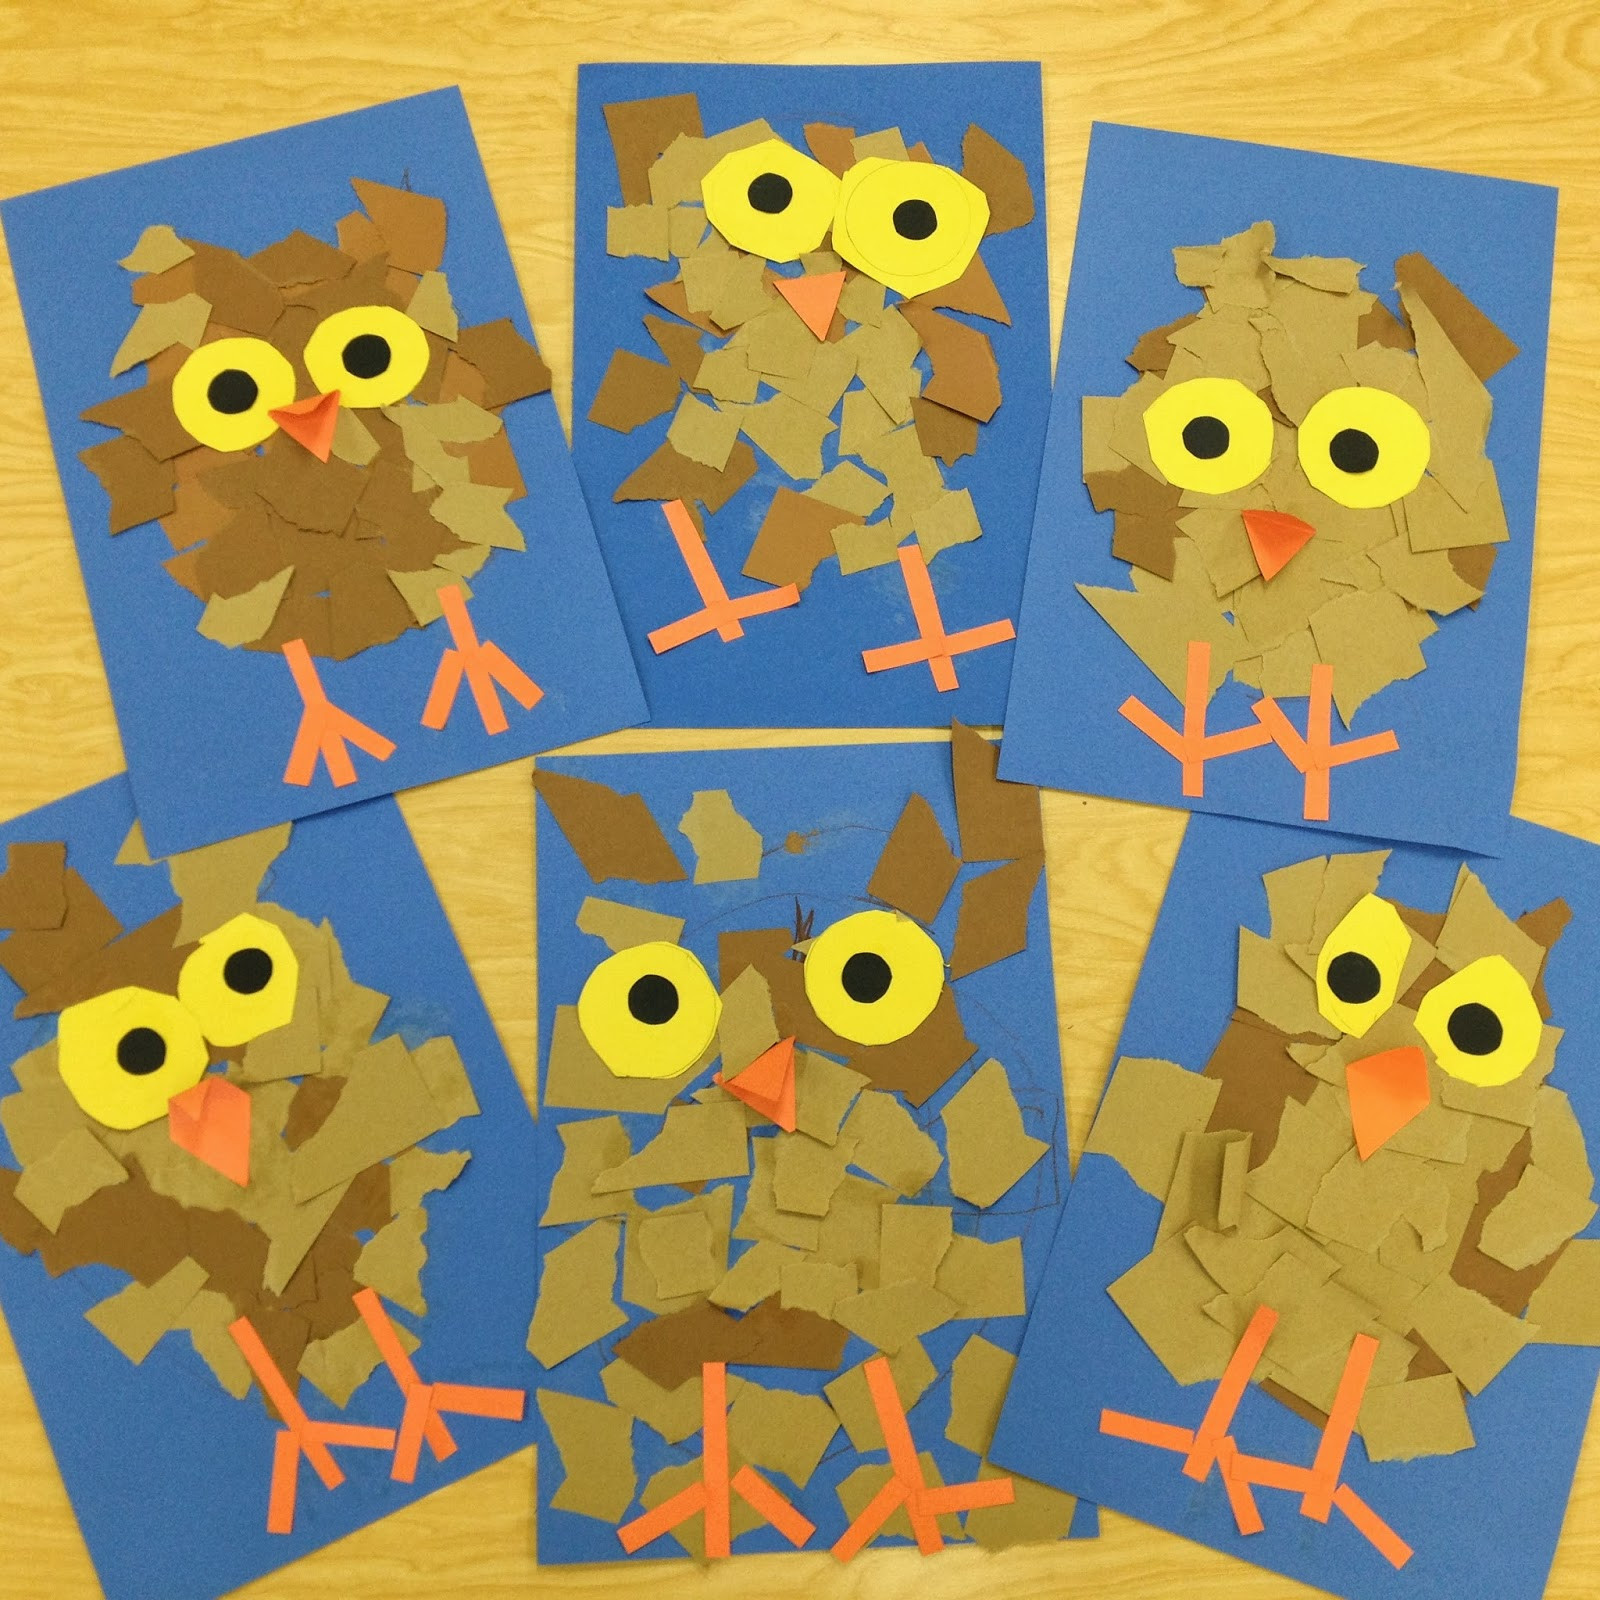 Top 25 Owl Crafts for Preschoolers - Home, Family, Style and Art Ideas